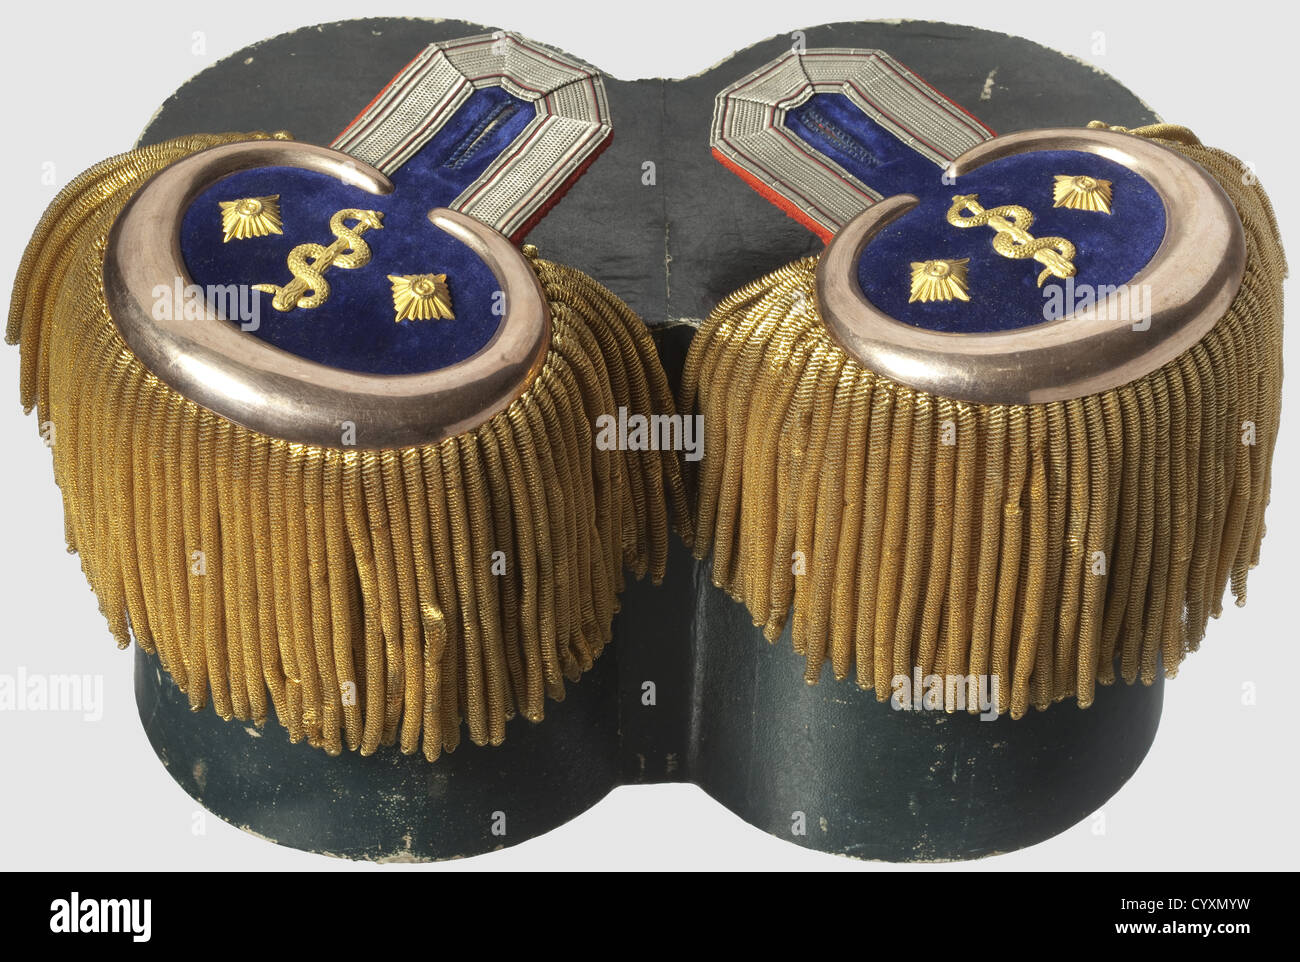 A pair of epaulettes for a full dress tunic,of a Wurttemberg general surgeon in the rank of a colonel Bright red velvet,silver borders with black-red interlaces,gold fringes,copper crescent moons,each with two rank stars and a gold rod of Asclepius on dark blue velvet. In cardboard box(slightly damaged),historic,historical,19th century,Wuerttemberg,Wurttemberg,Württemberg,Southern Germany,the South of Germany,south german,object,objects,stills,clipping,clippings,cut out,cut-out,cut-outs,utensil,piece of equipment,utensils,item,items,Additional-Rights-Clearences-Not Available Stock Photo